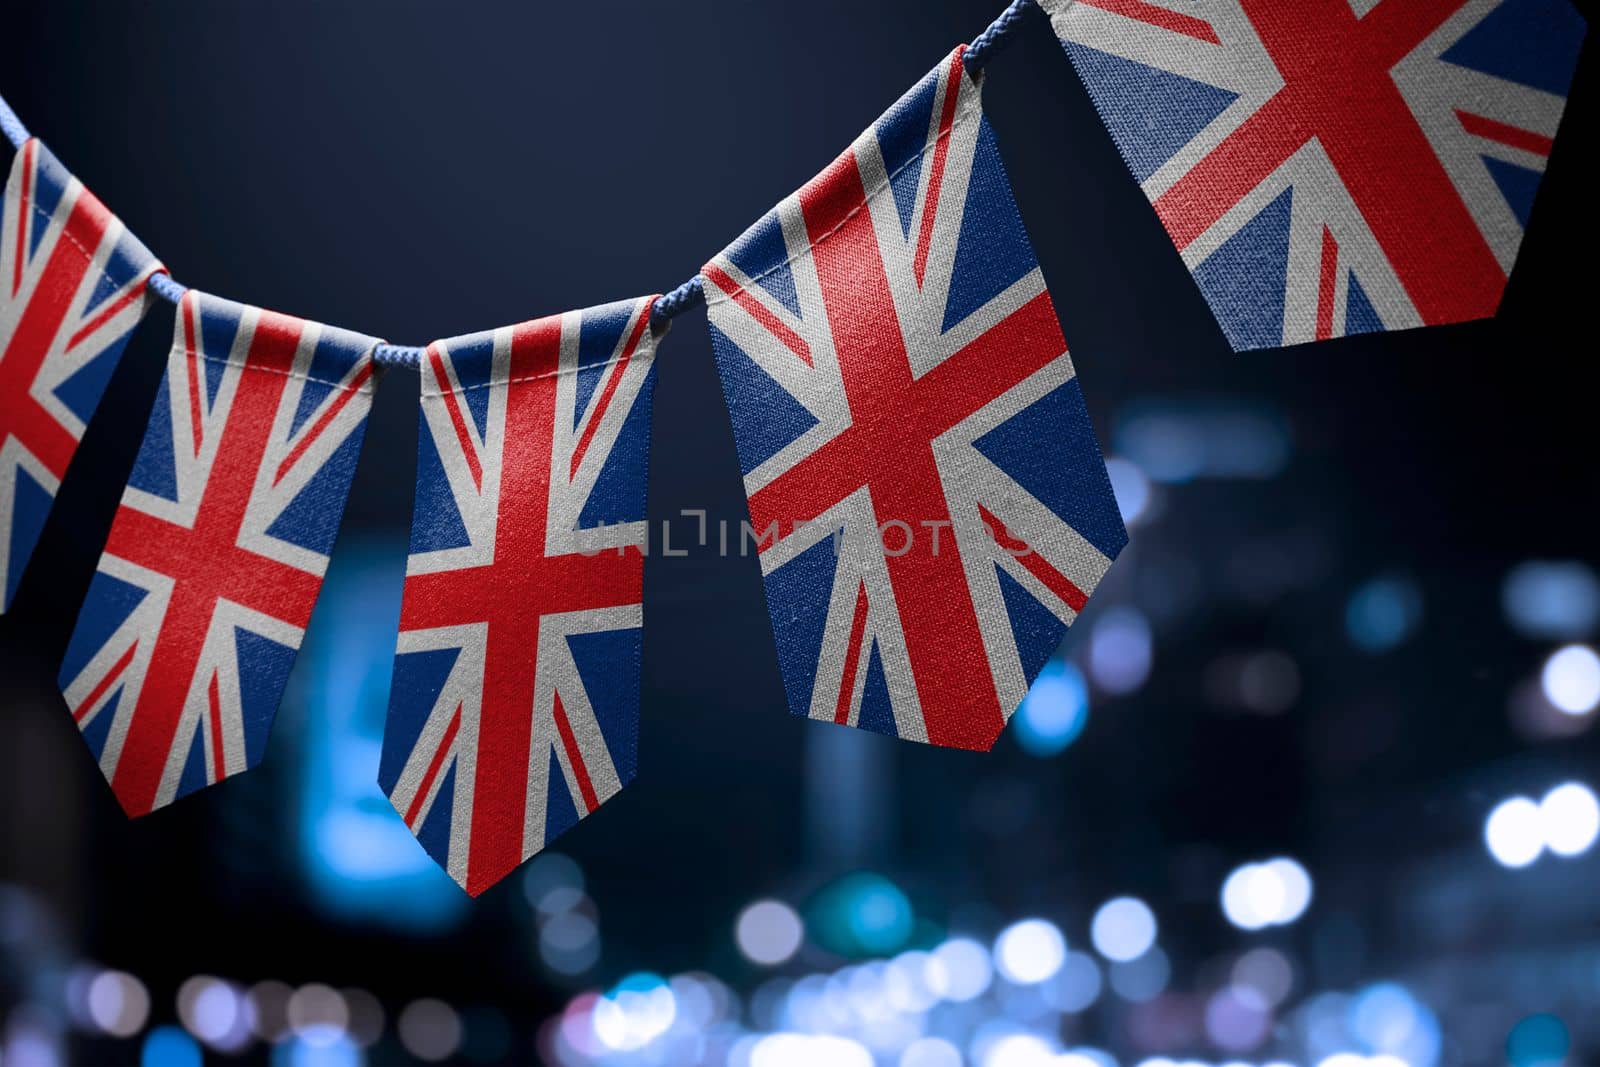 A garland of United Kingdom national flags on an abstract blurred background.